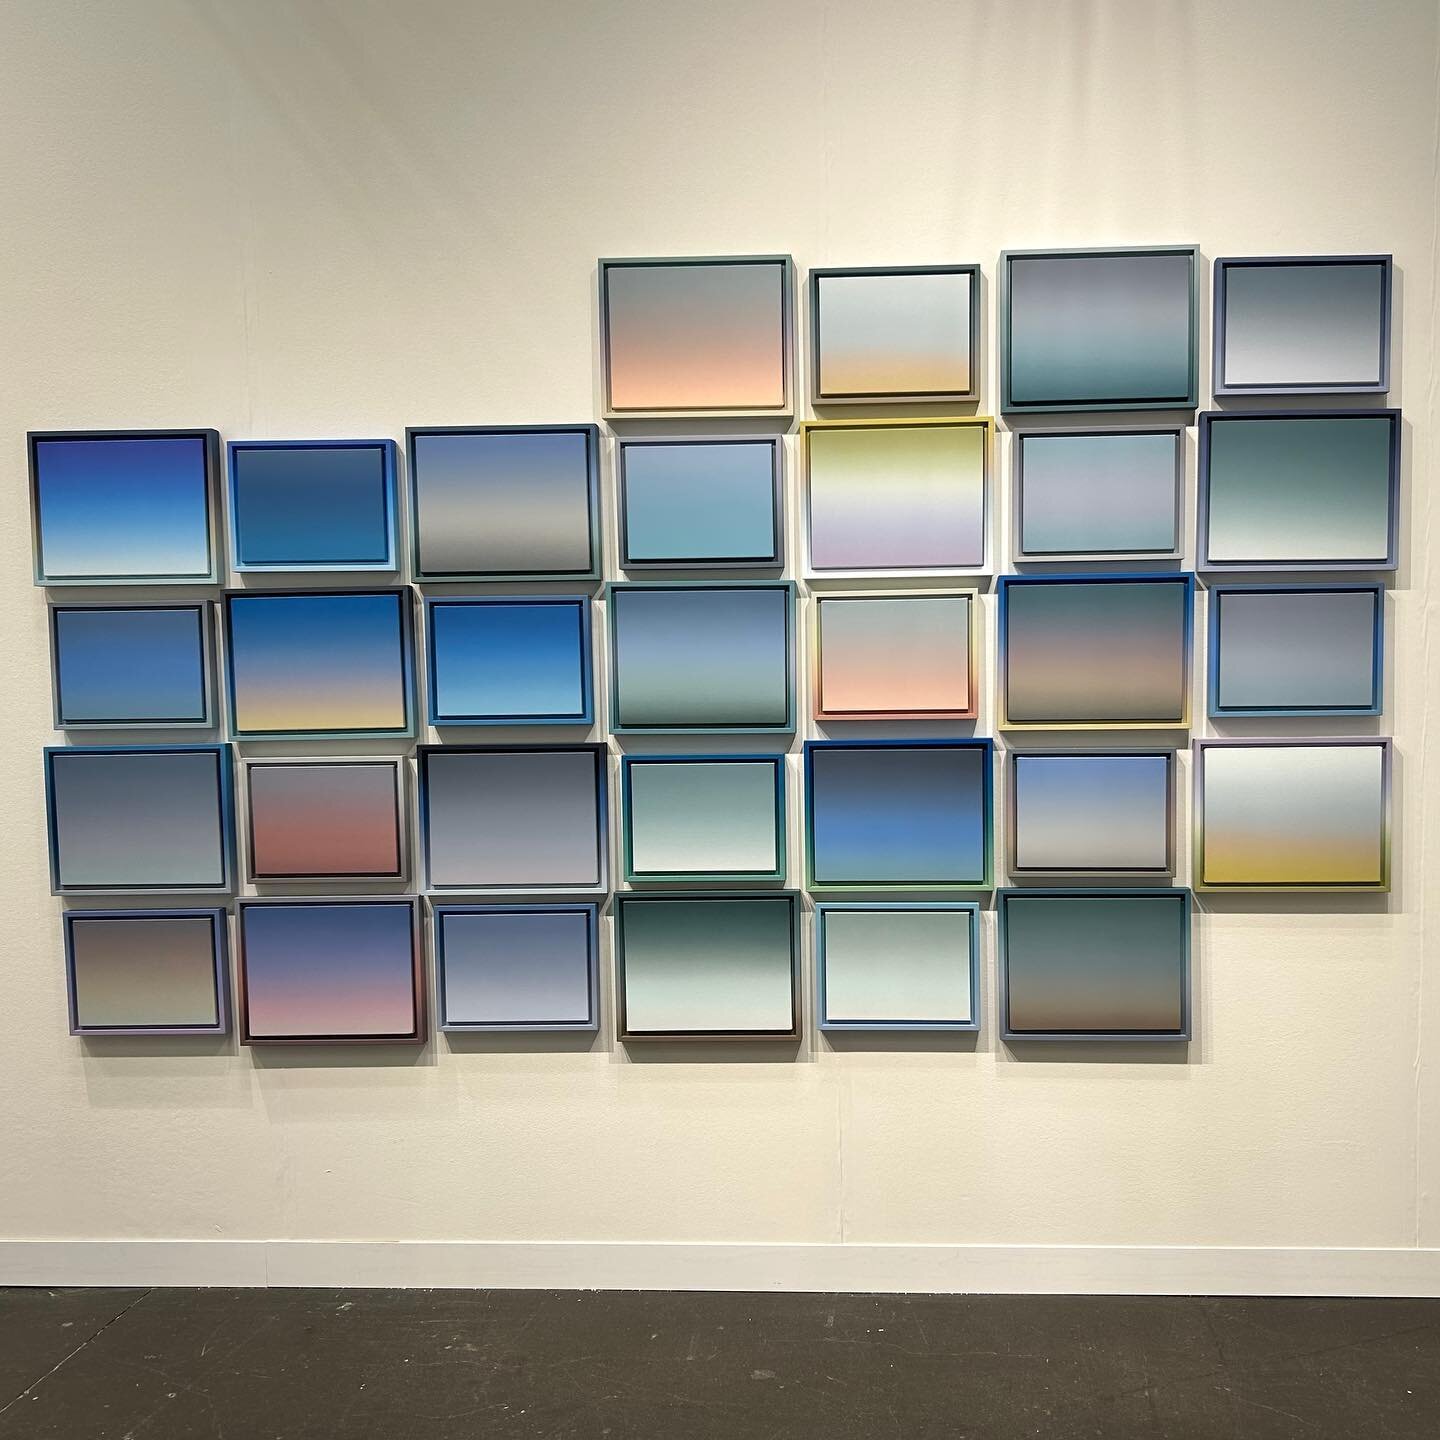 My highlights from the Armory Show last week:

Rob Pruitt @robpruitt5000 at 303 Gallery @303gallery

Tracey Emin @traceyeminstudio at Lorcan O&rsquo;Neill @gallerialorcanoneill

Heinz Mack @heinz_mack_official at Nara Roesler @galerianararoesler

Rya